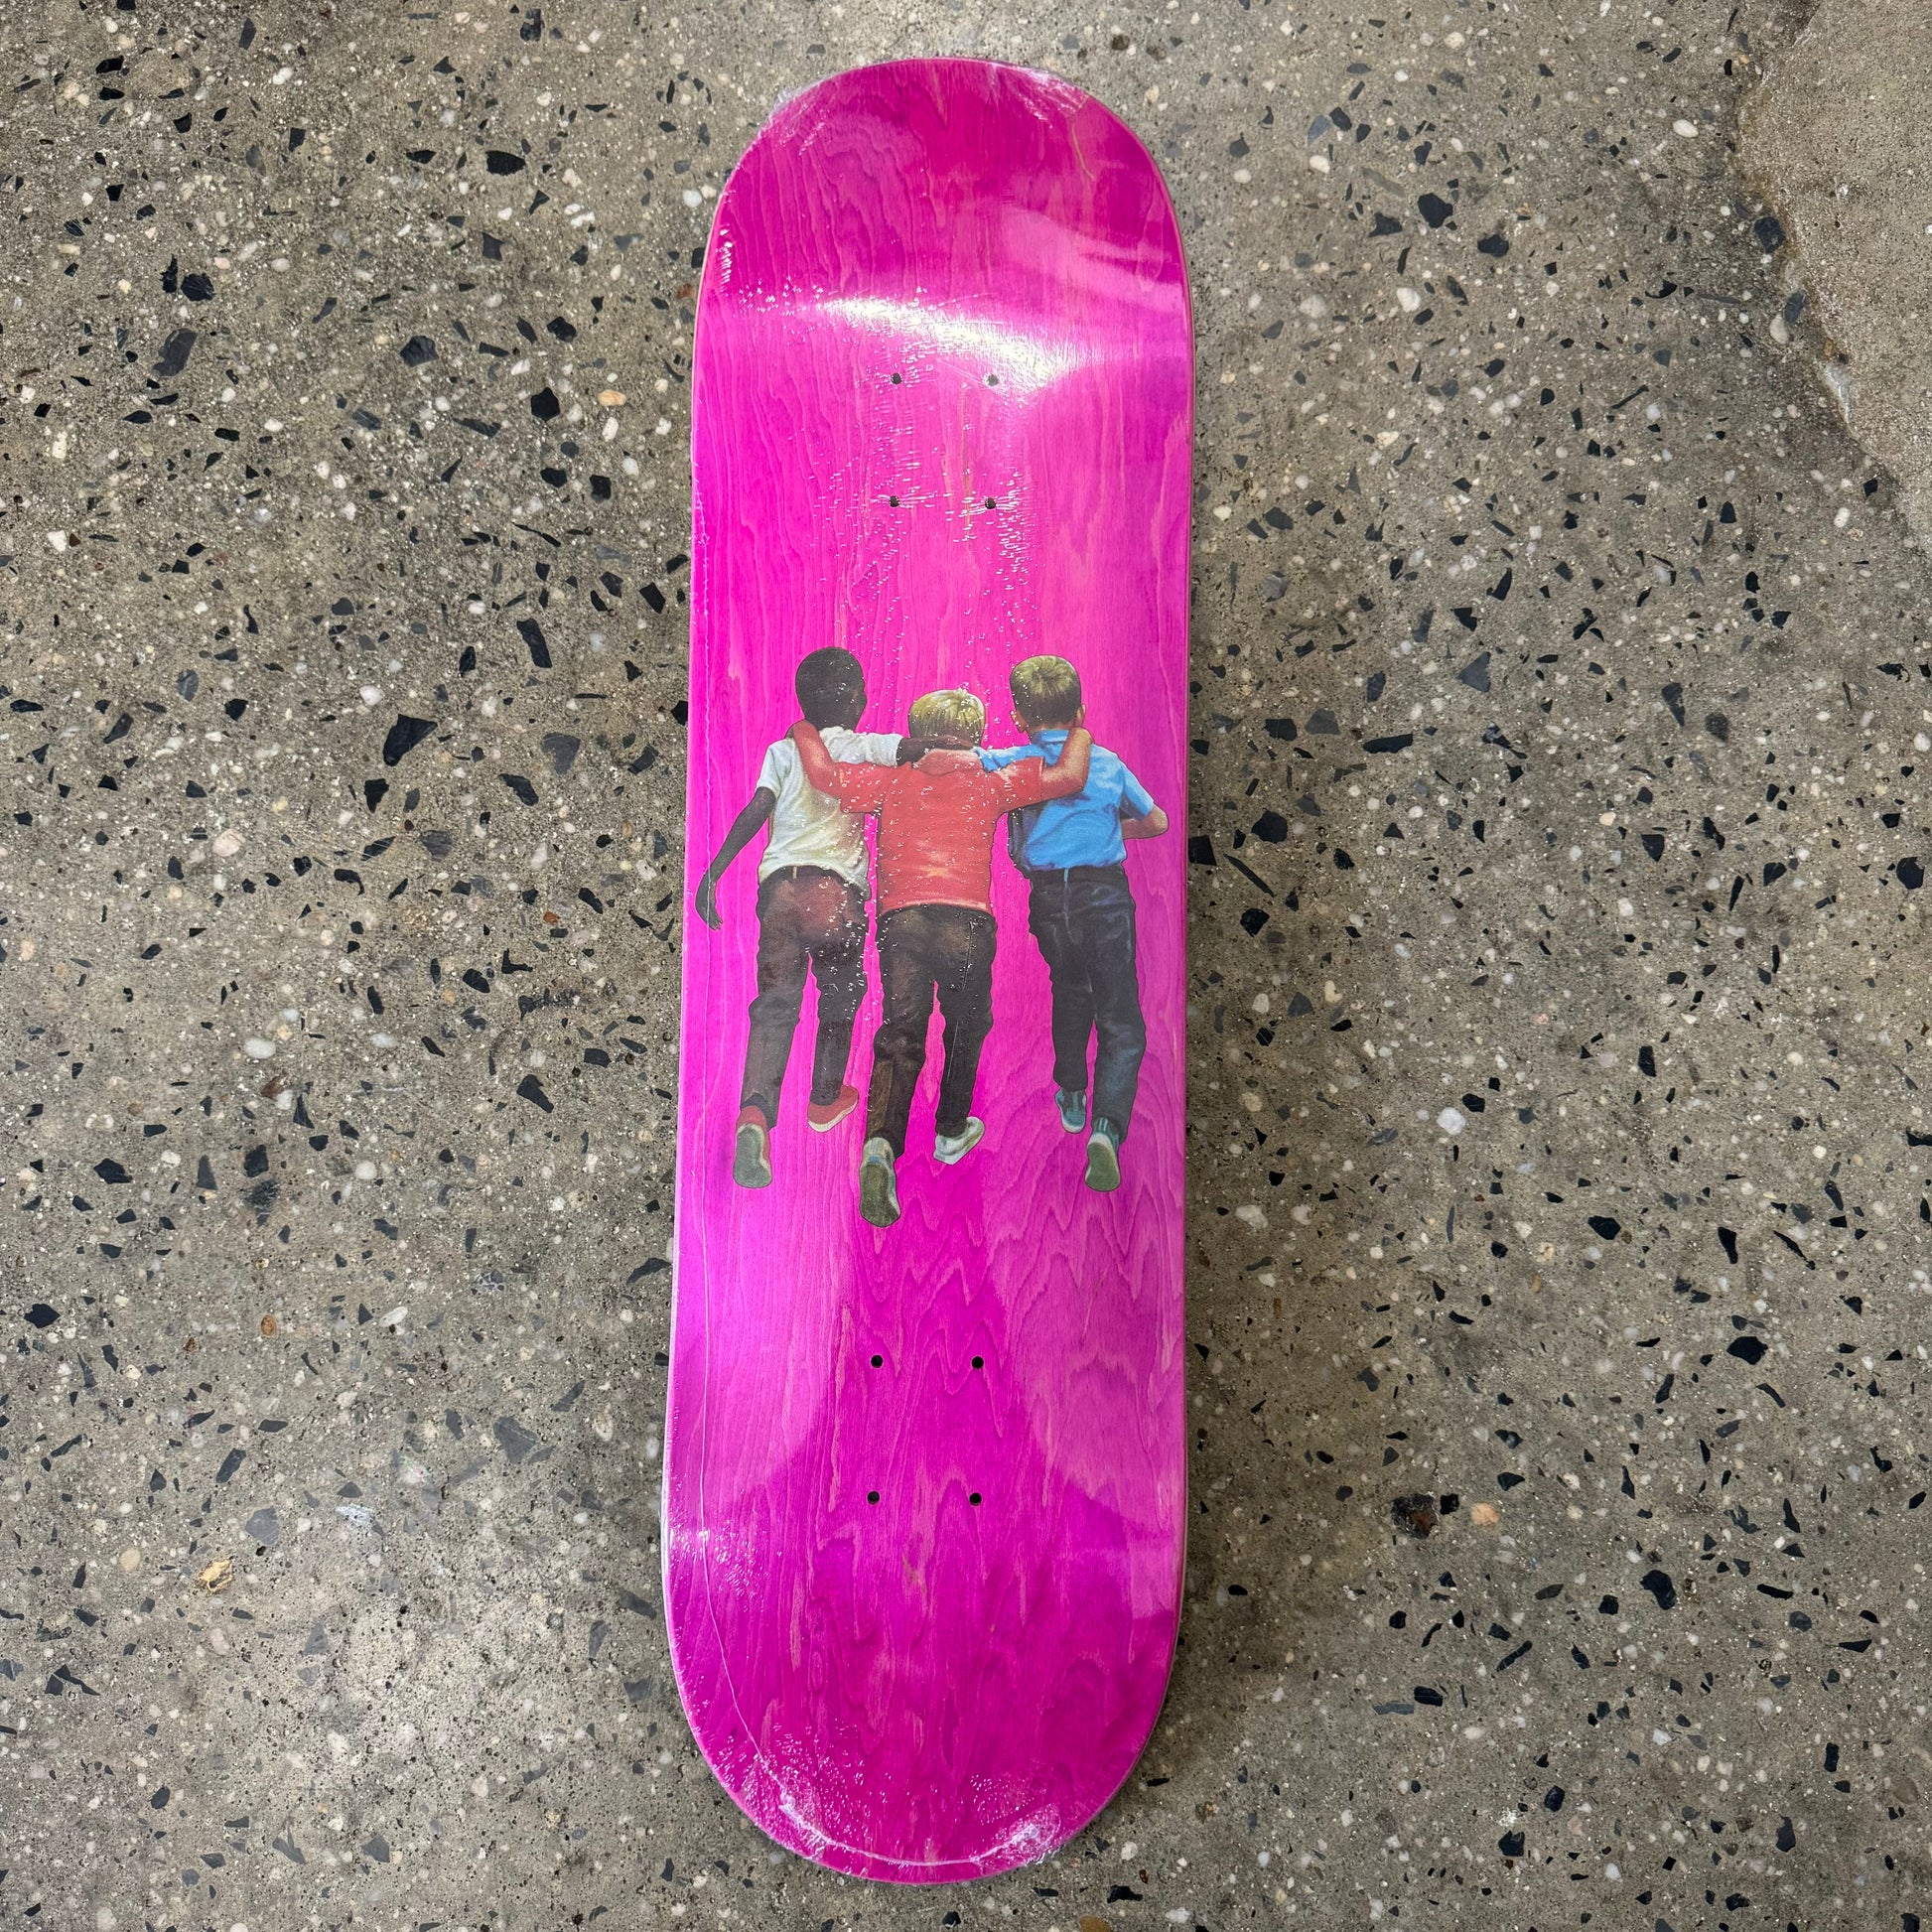 3 kids with arms around each other on pink skate deck